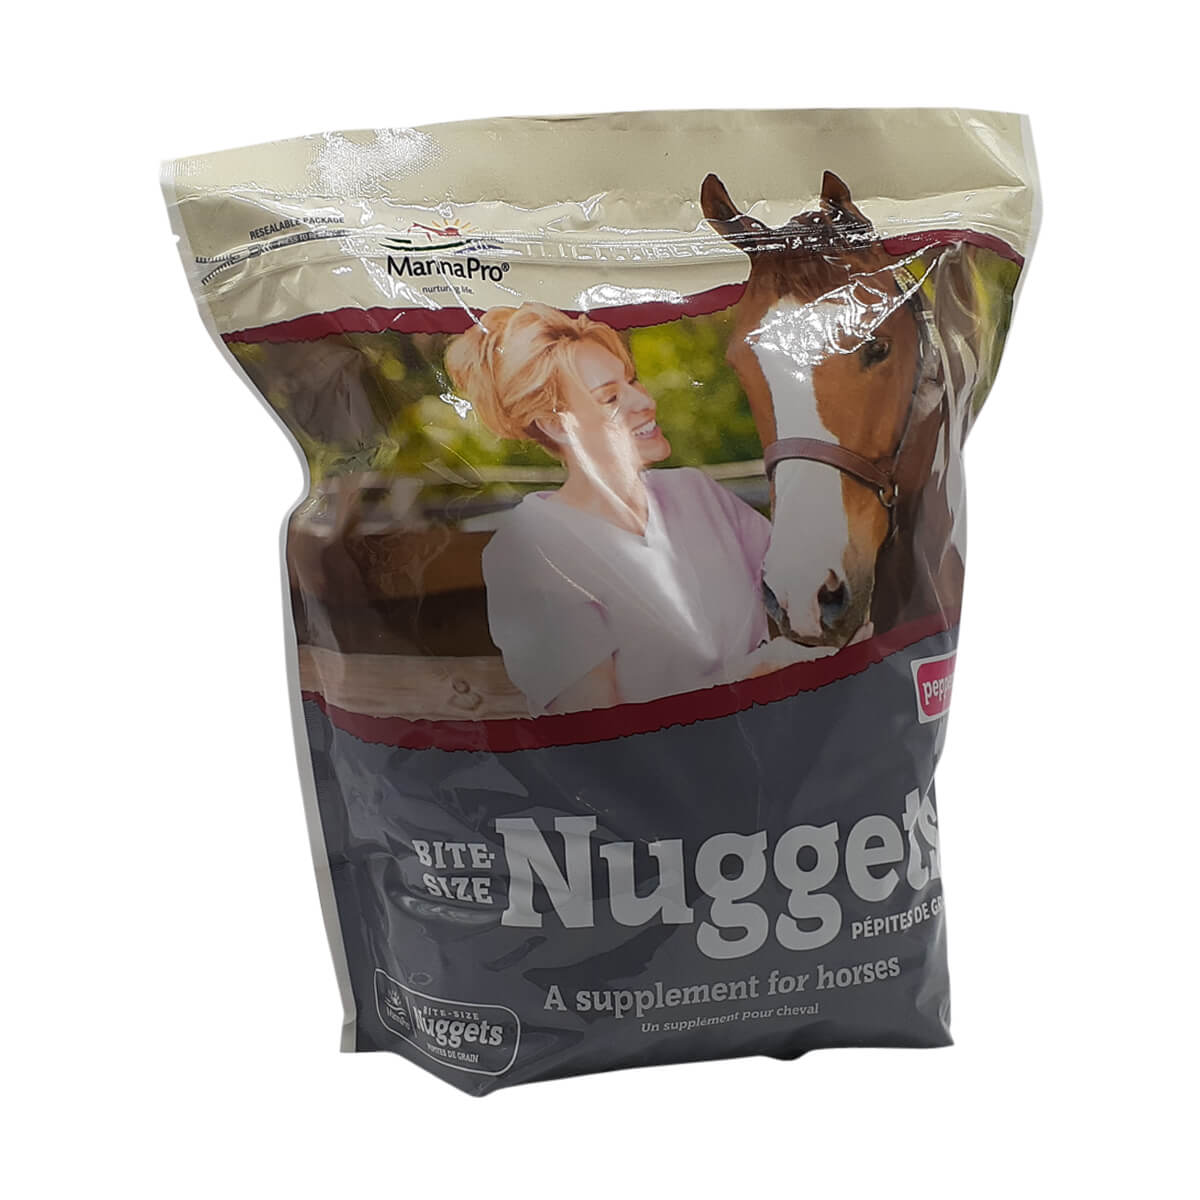 Bite-Sized Apple Nuggets for Horses - Peppermint - 5 lb